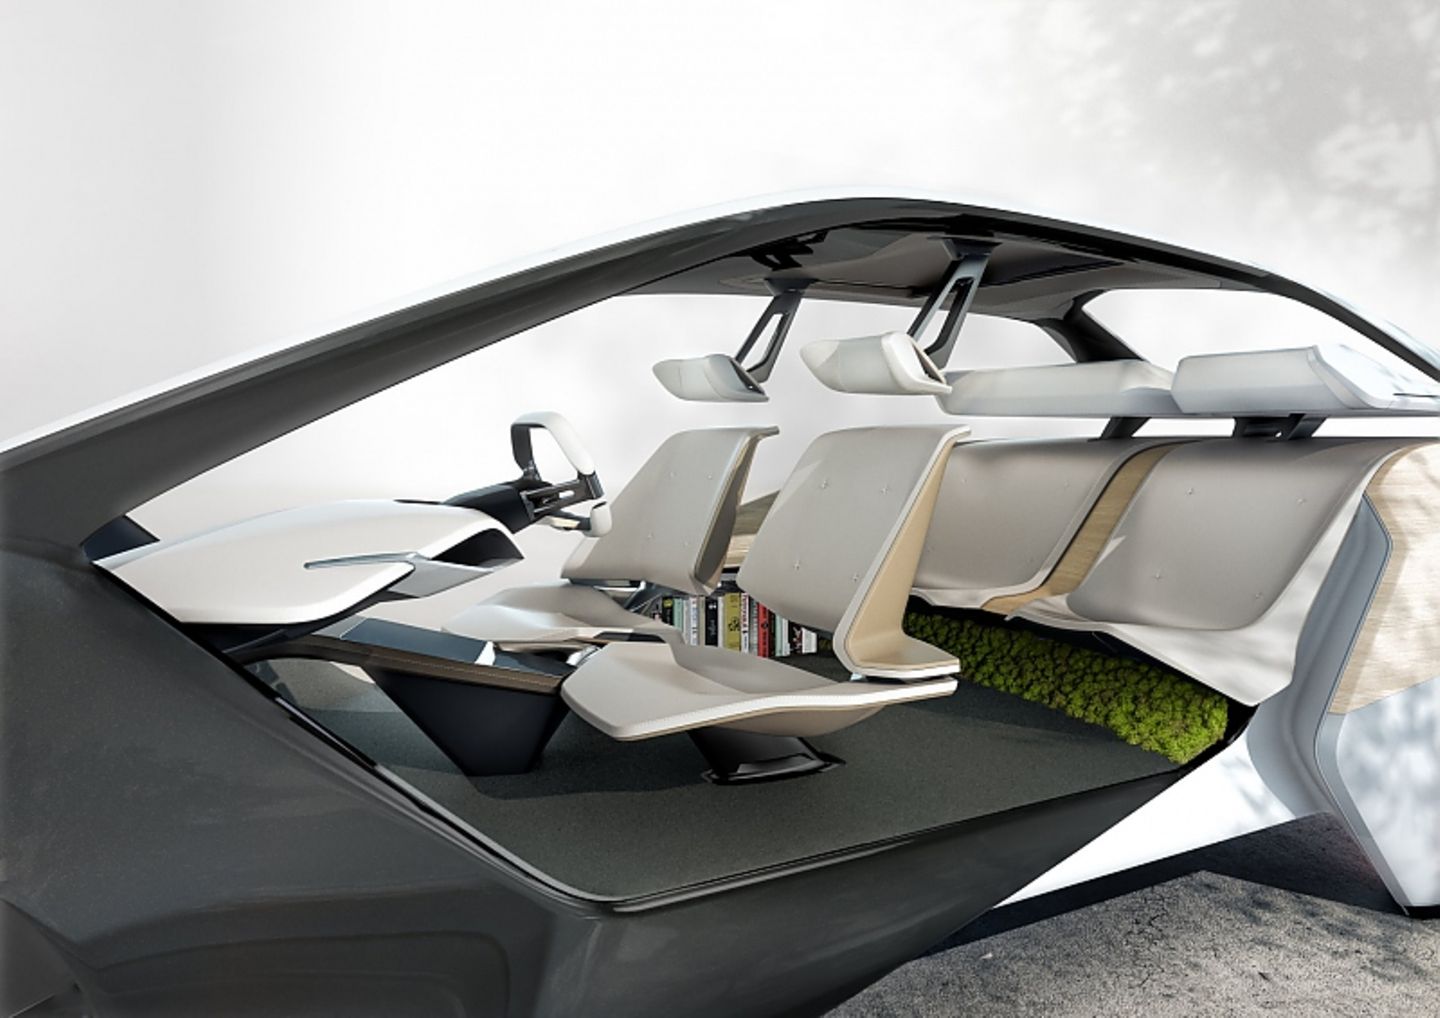 BMW Interieur of the Future